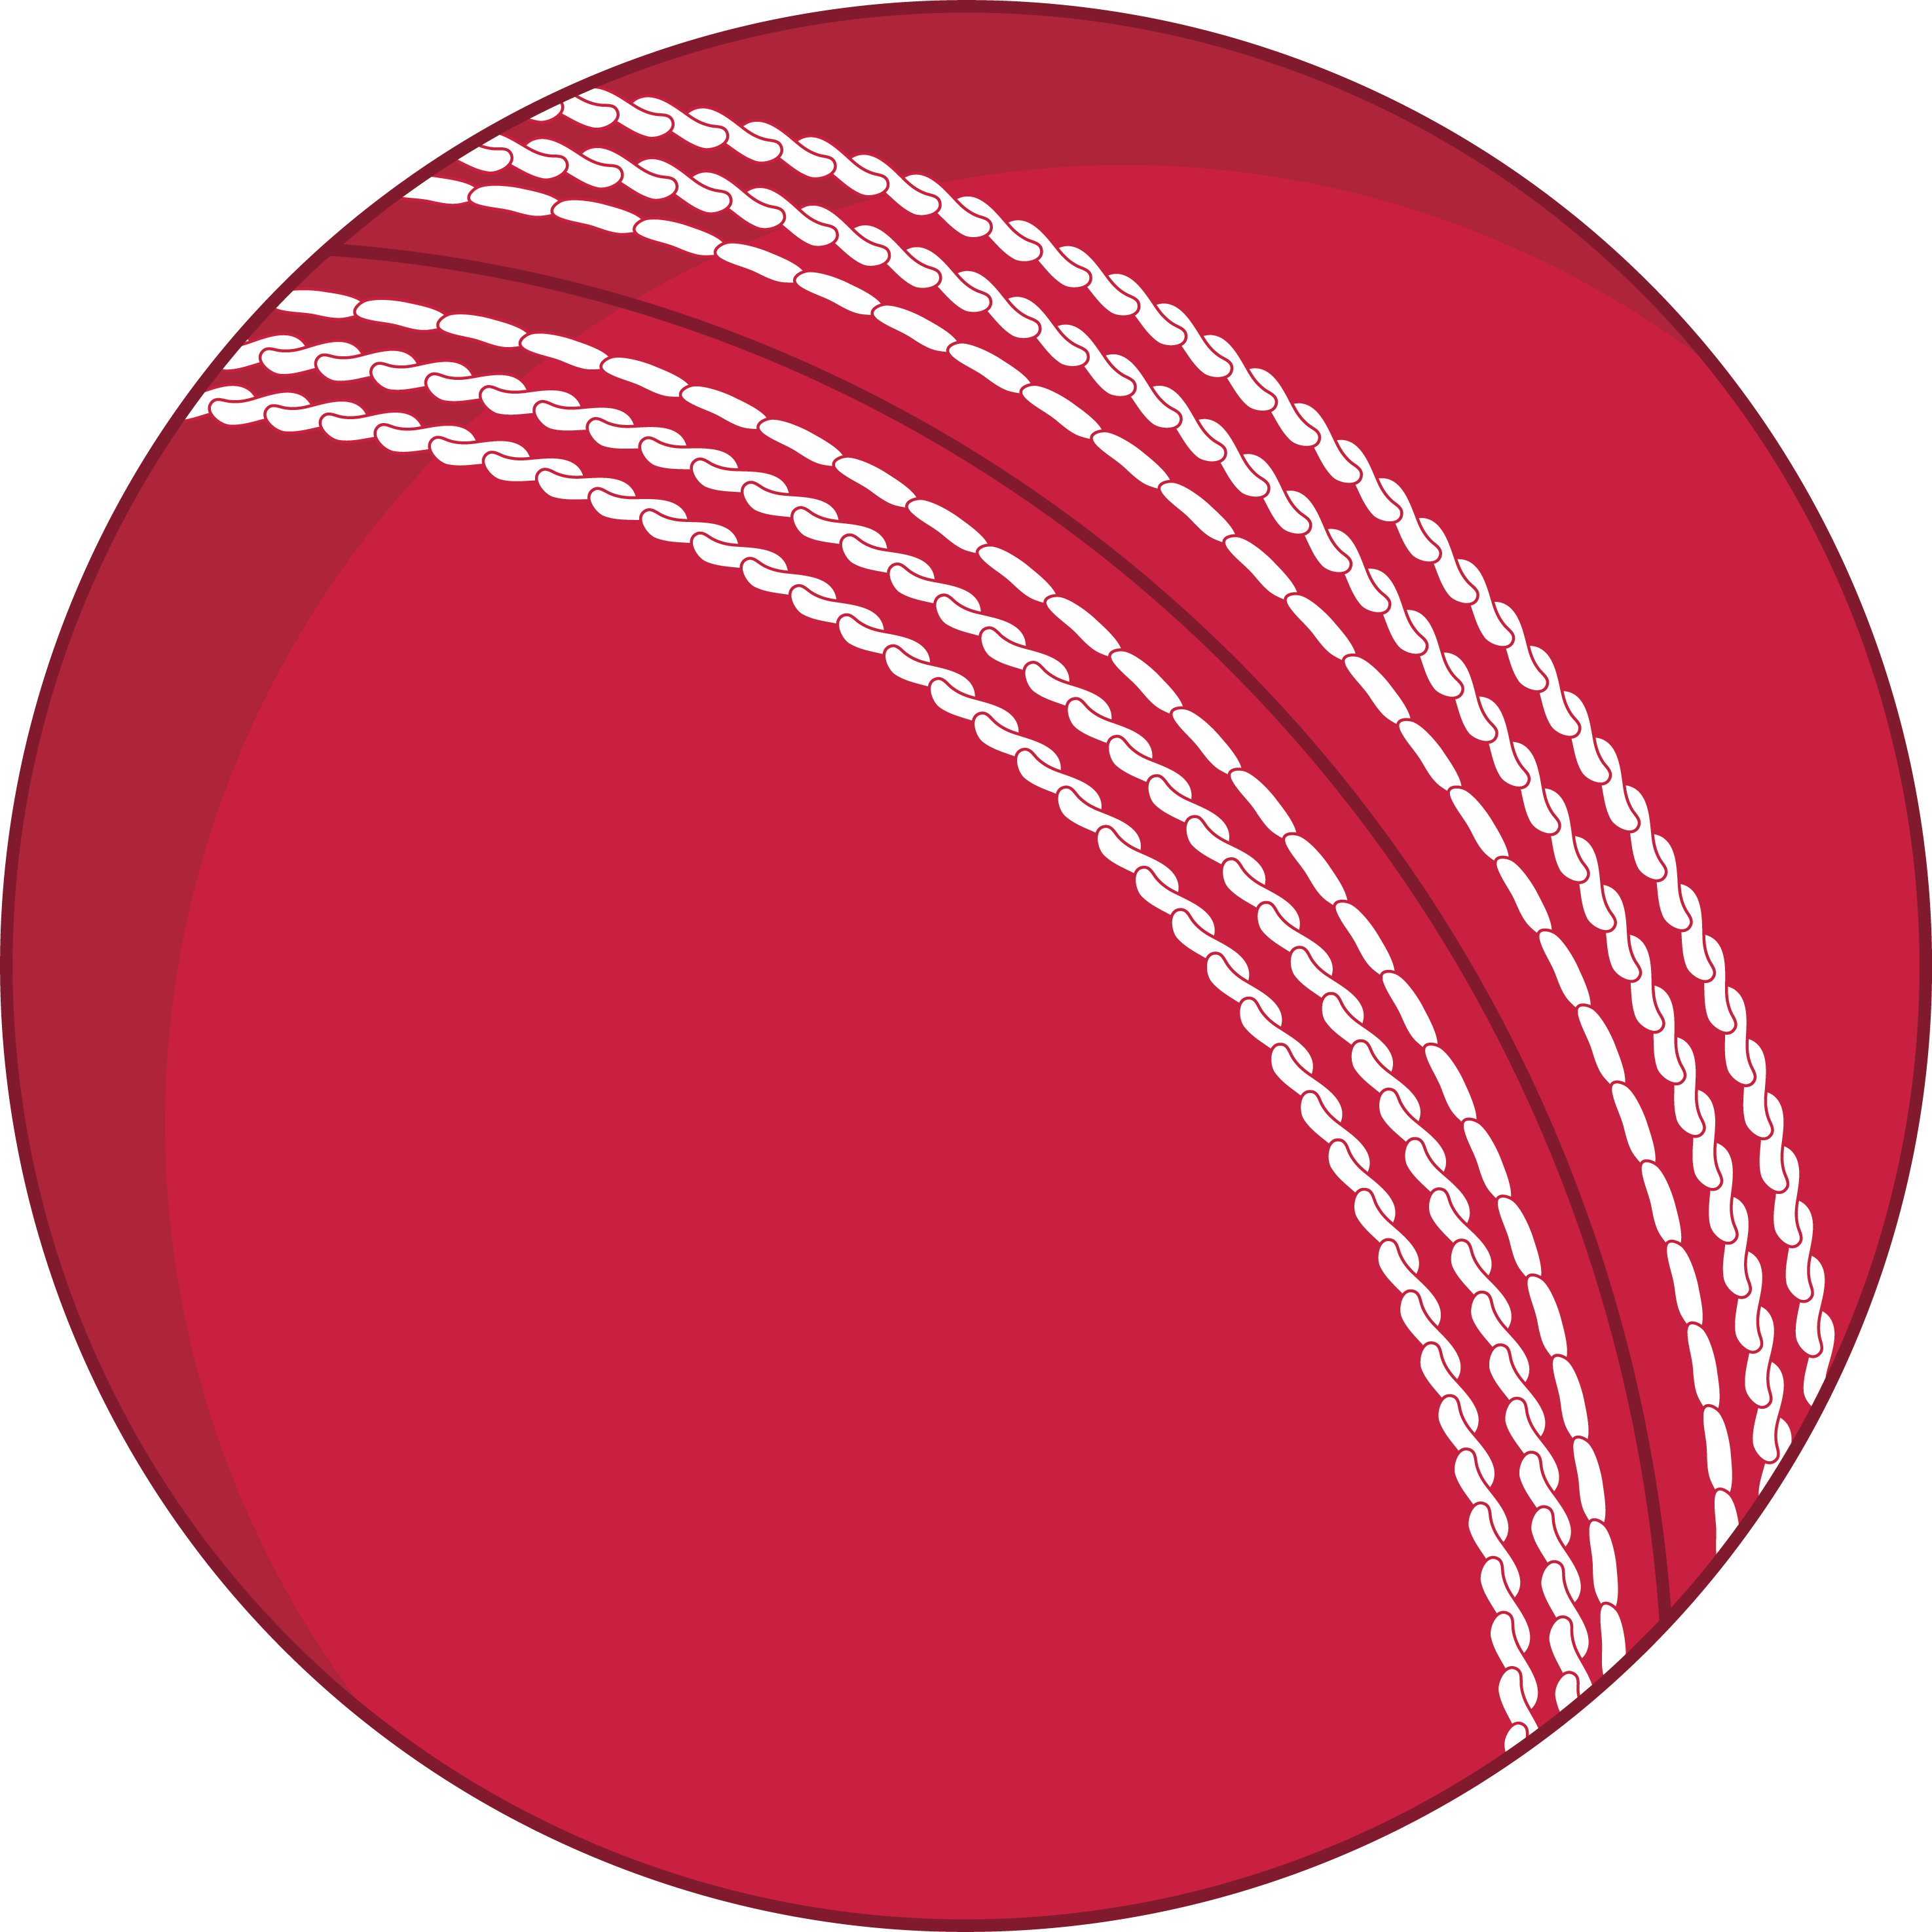 cricket clipart pink